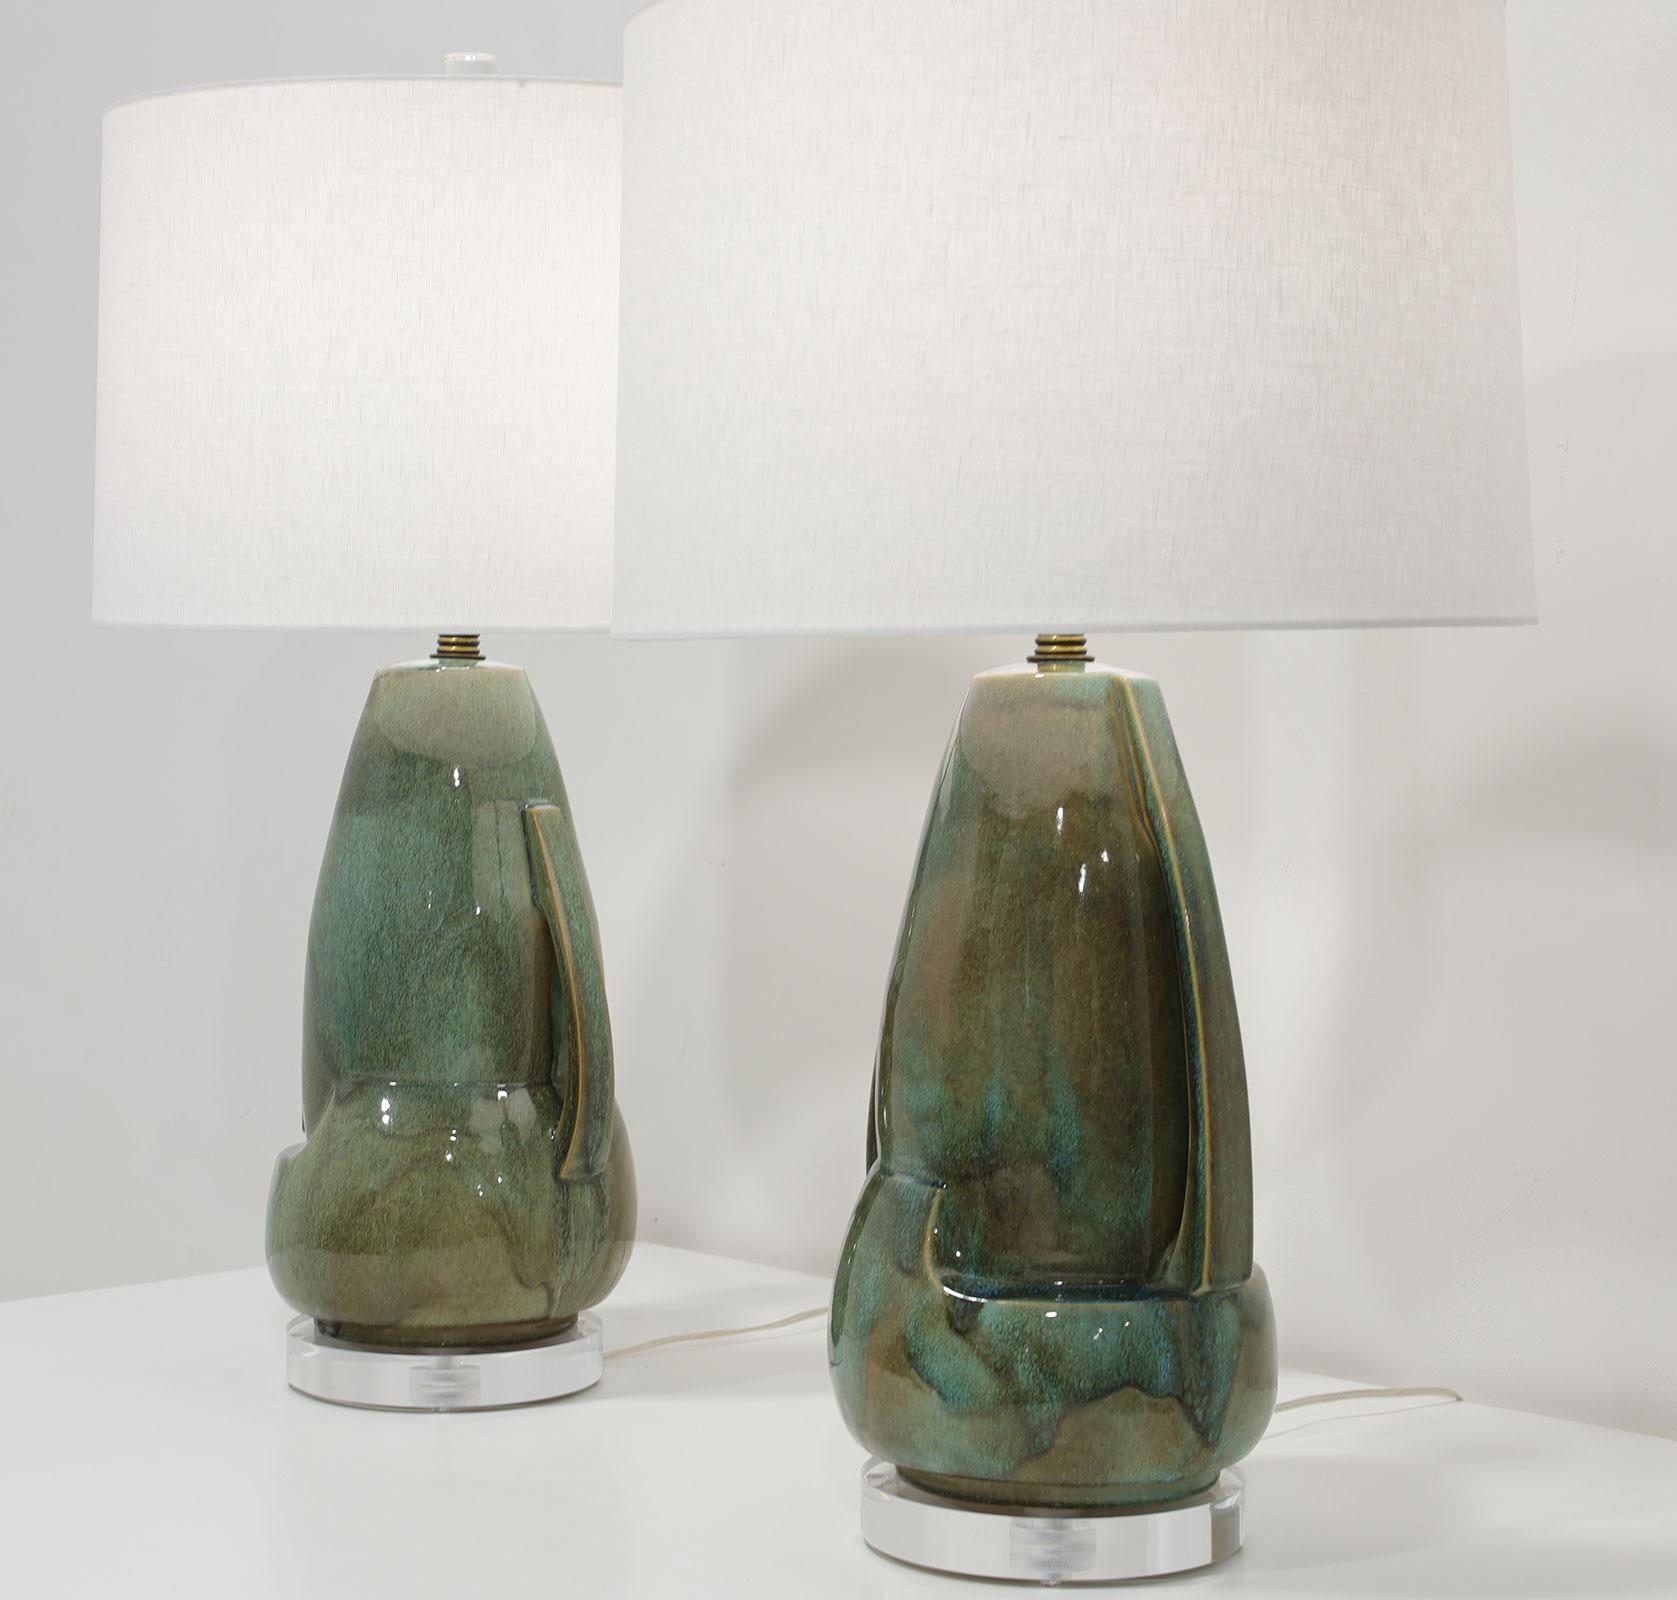 Beautiful pair of 1960s high-quality ceramic drip glaze table lamps. Lamps have 